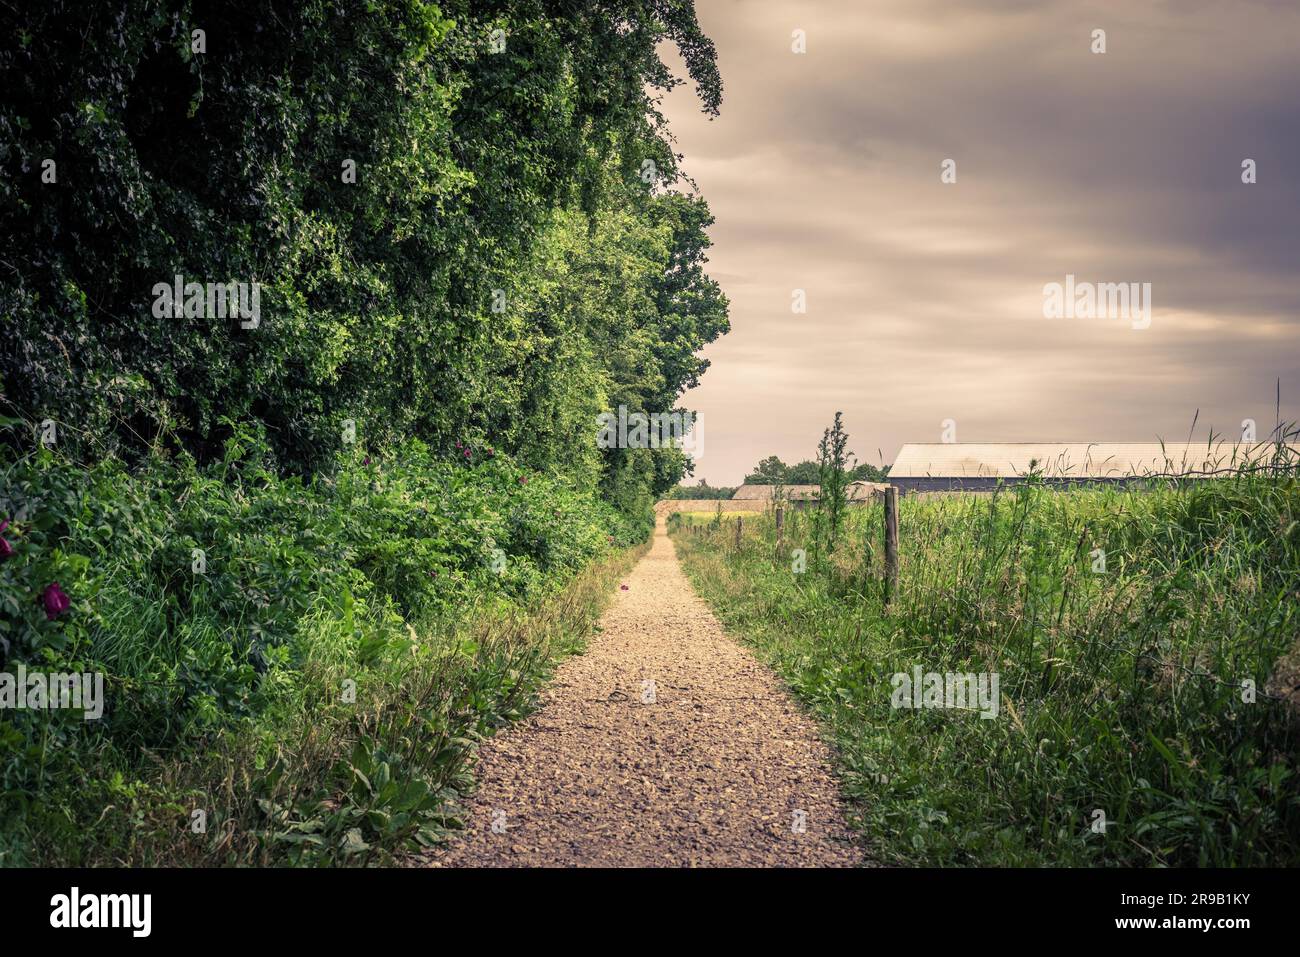 Long outdoor path in dark cloudy weather Stock Photo